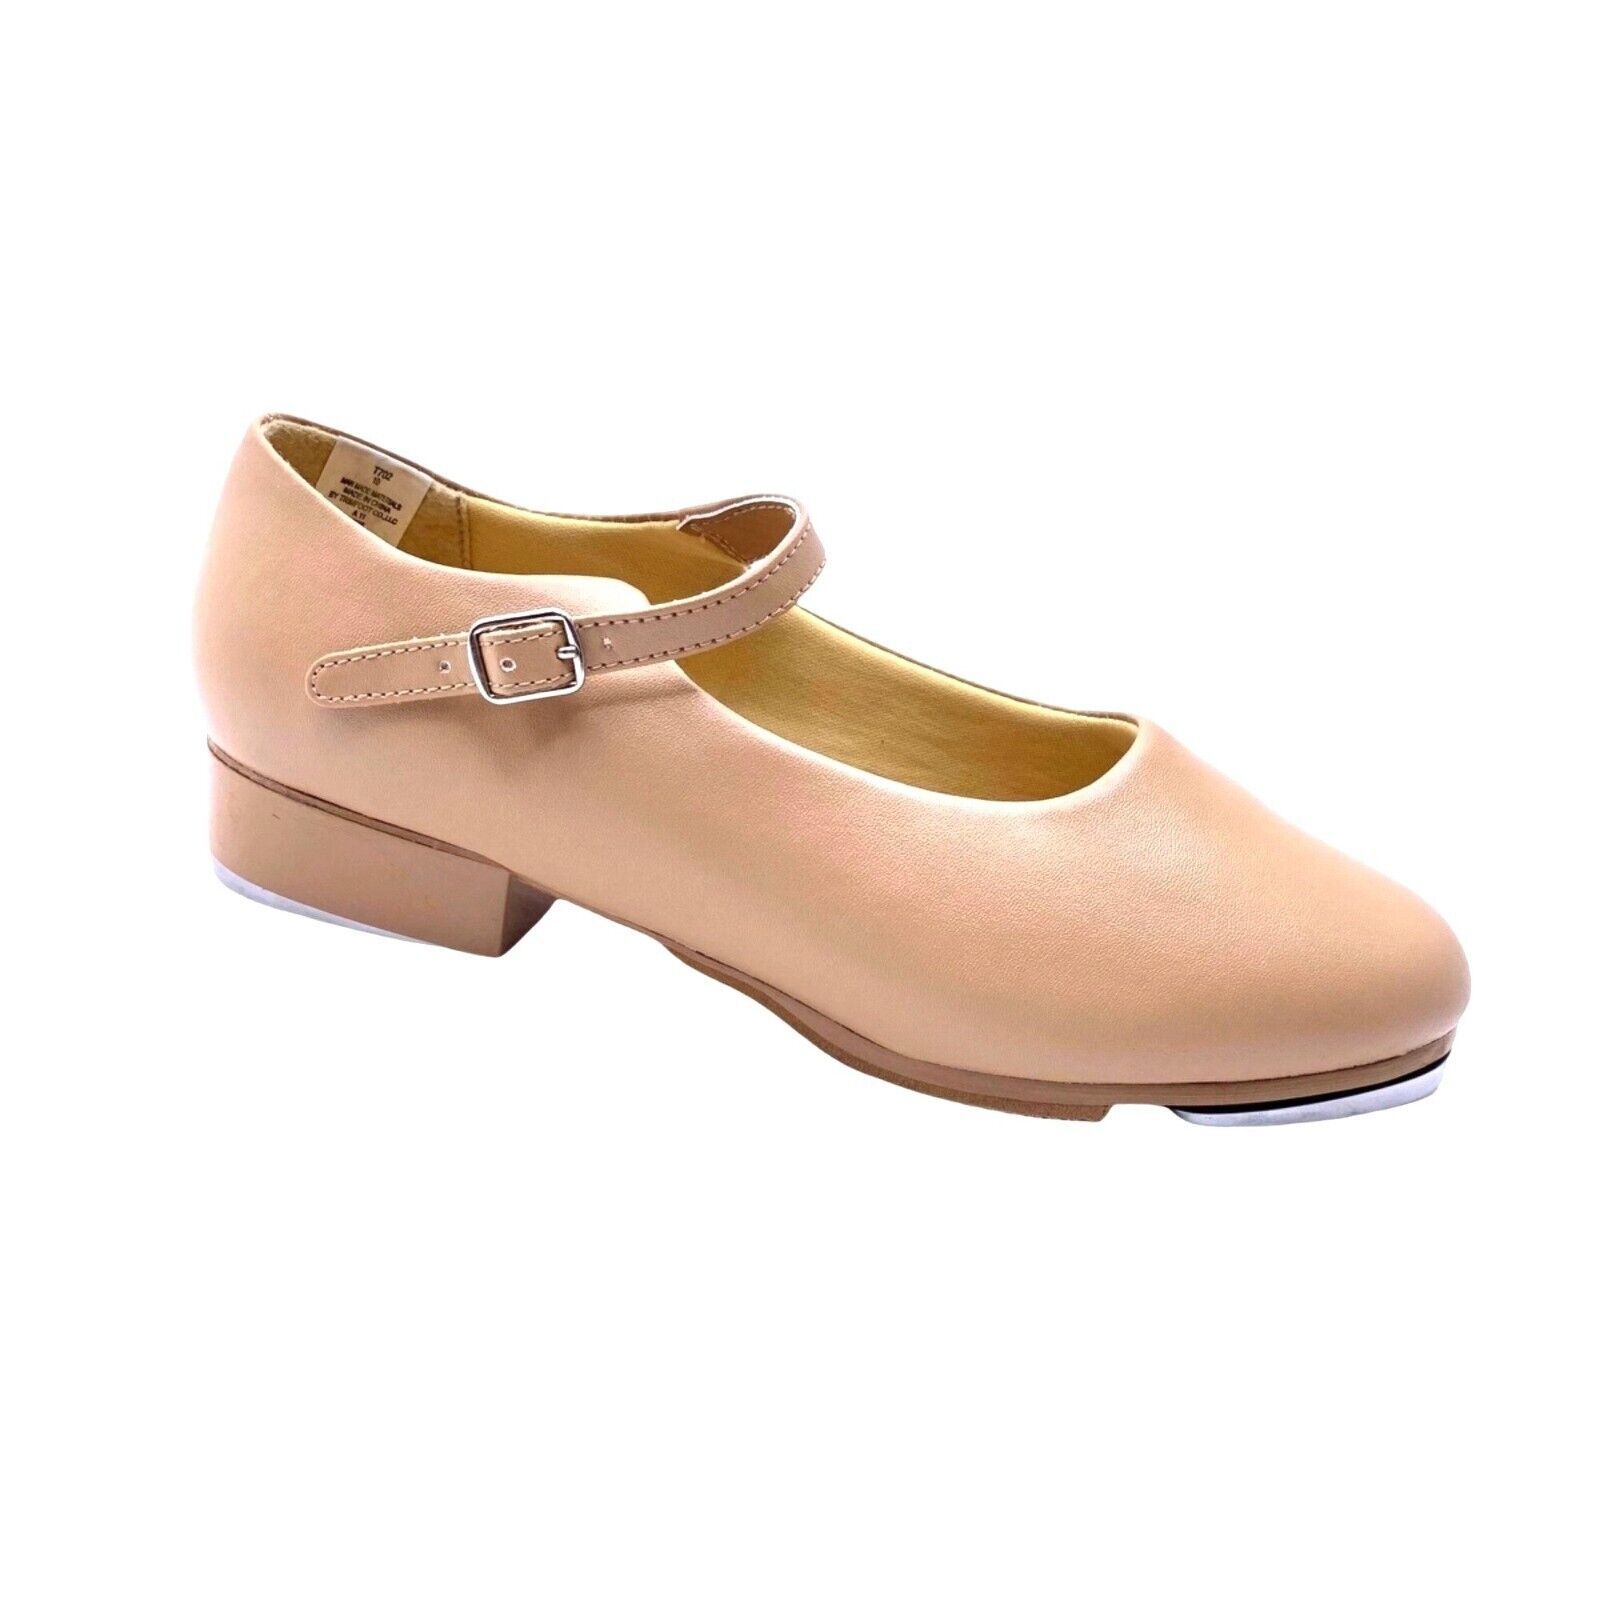 Primary image for Little Girls Mary Jane Tap Shoes Caramel Beige Buckle 12 Dance Class Recital